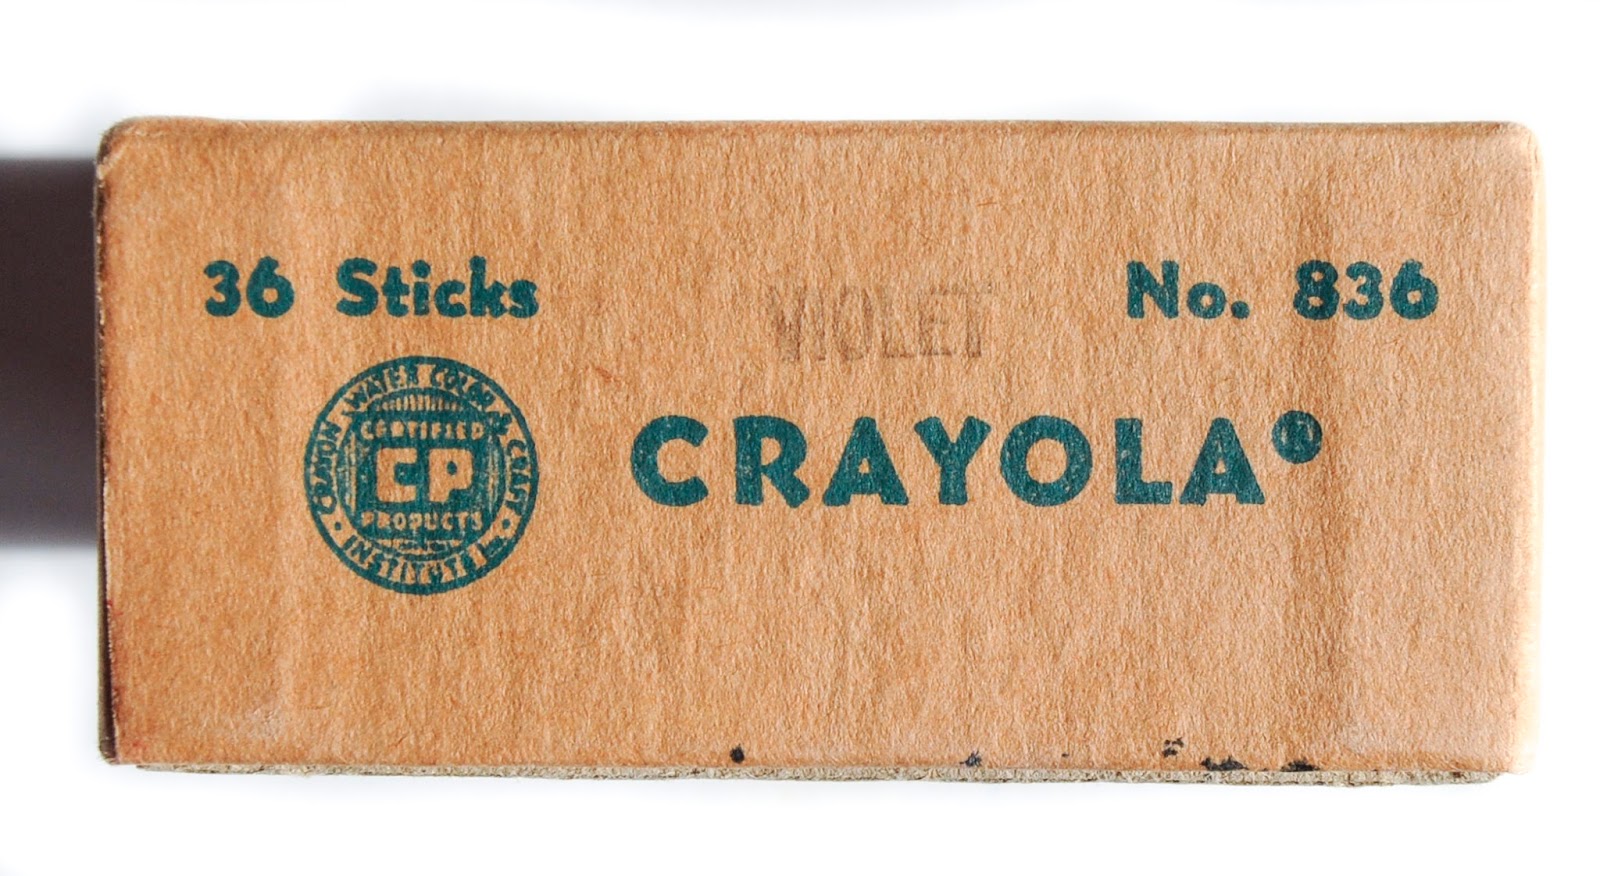 1955 Crayola Vintage Green Jumbo Crayons: What's Inside the Box